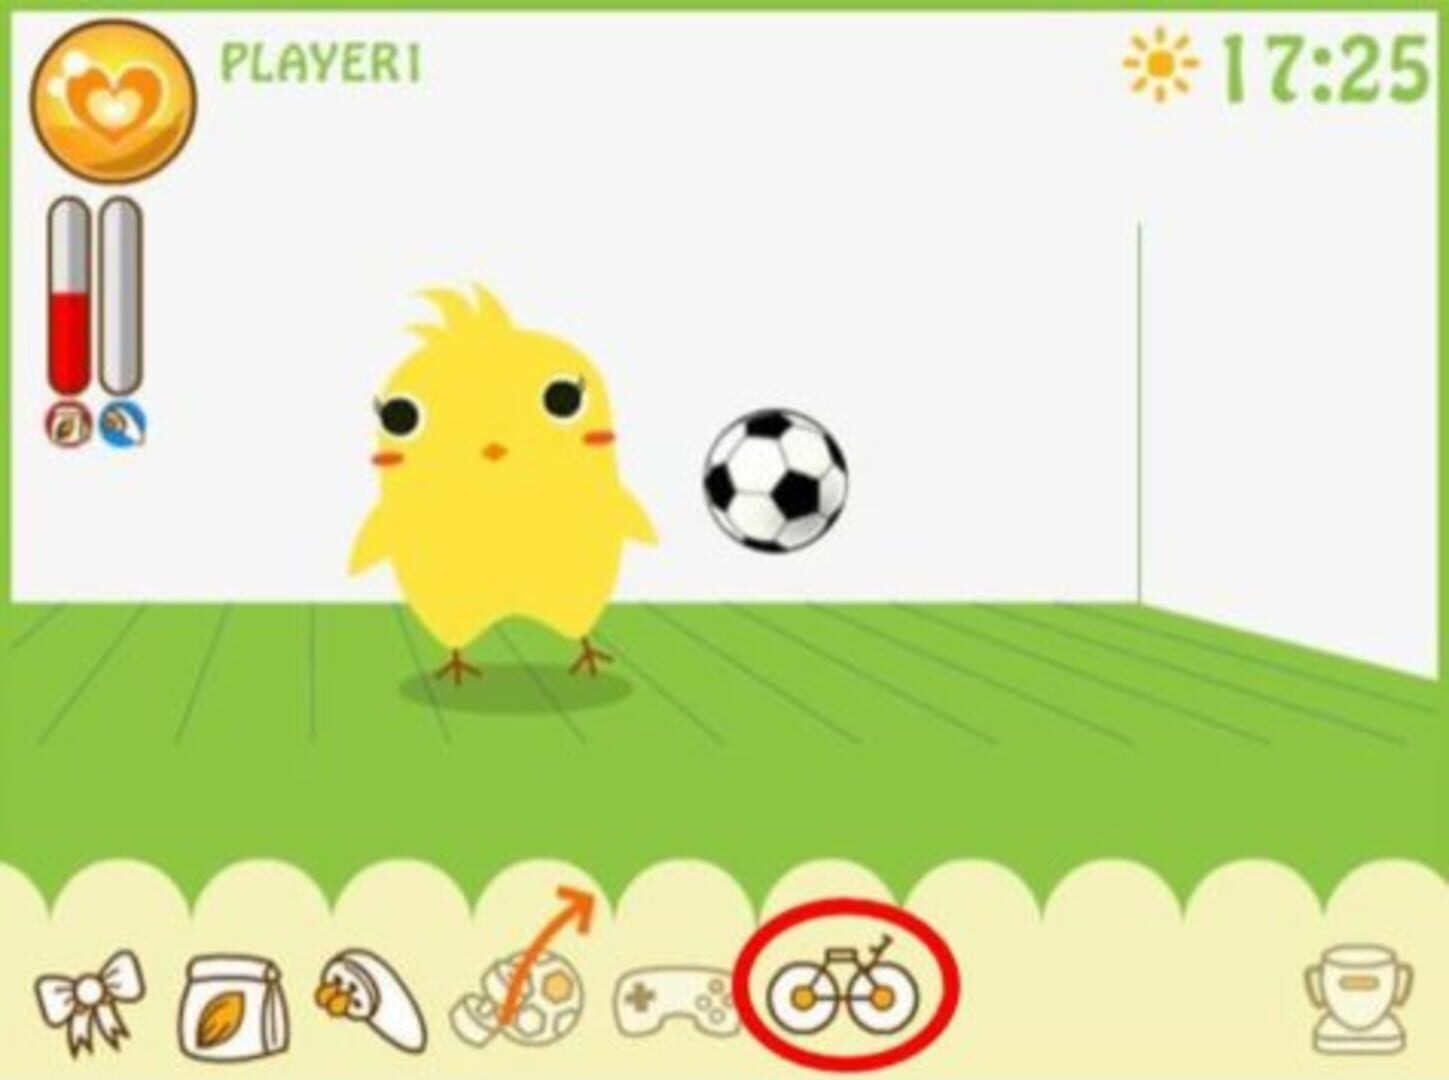 Games can he play. Цыпленок can your Pet. Can you Pet игра. Can your Pet Classic игра. Can your Pet Classic играть.